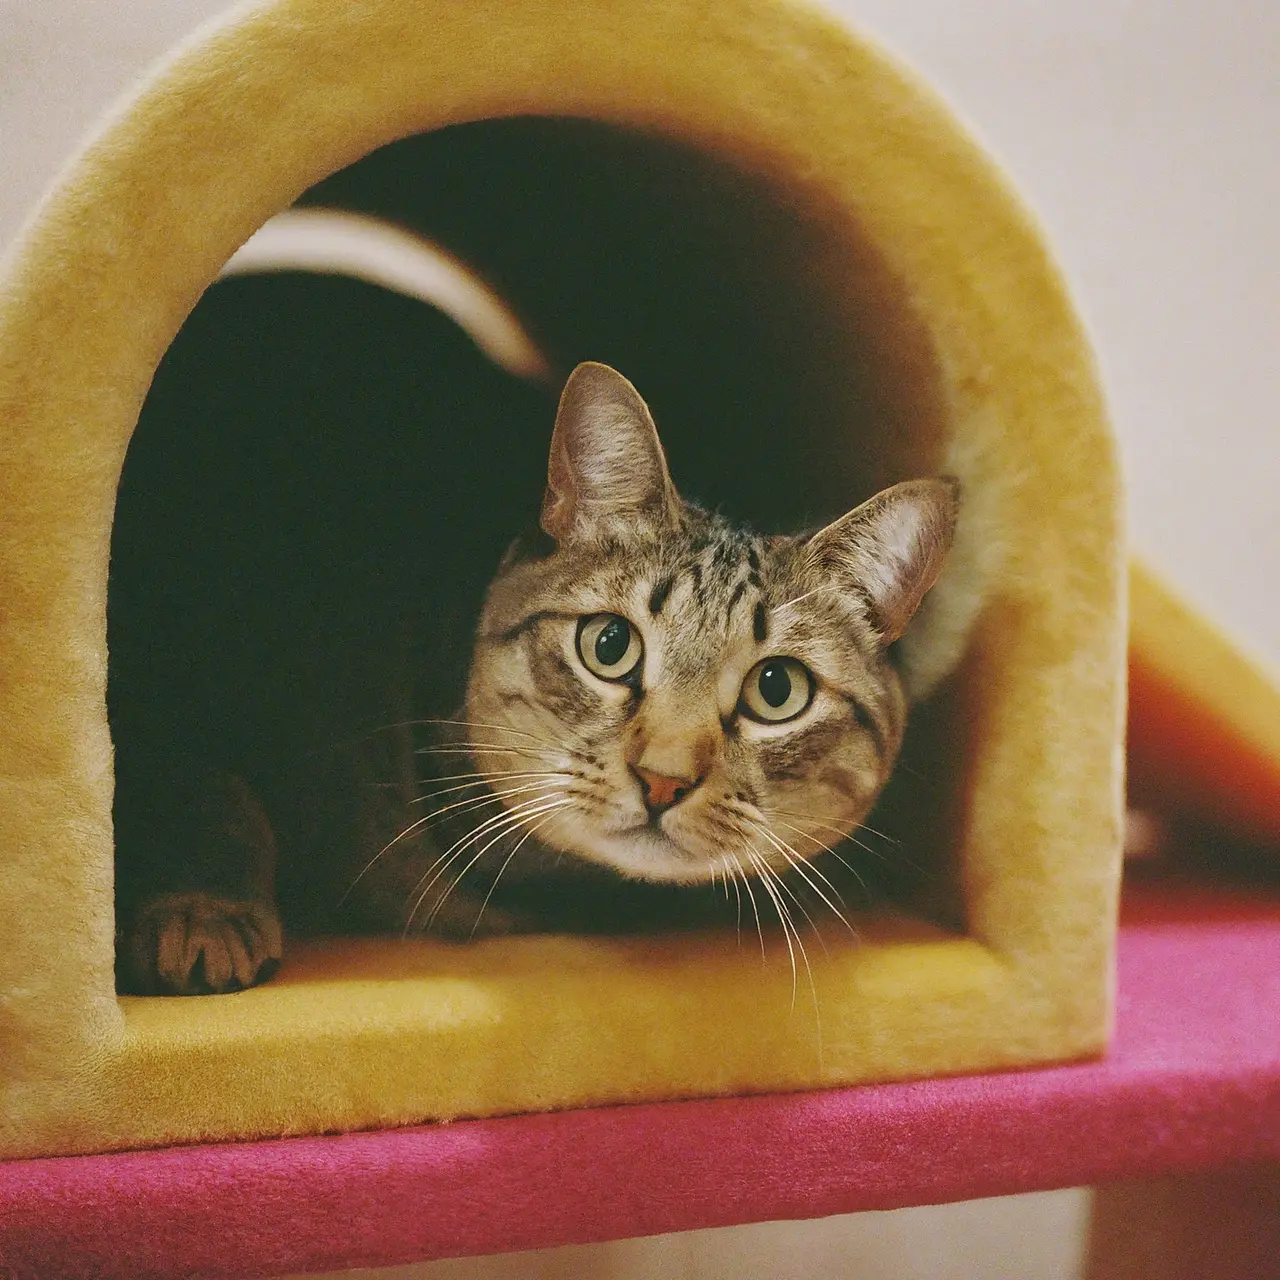 A cat playing in a multi-level indoor playground. 35mm stock photo